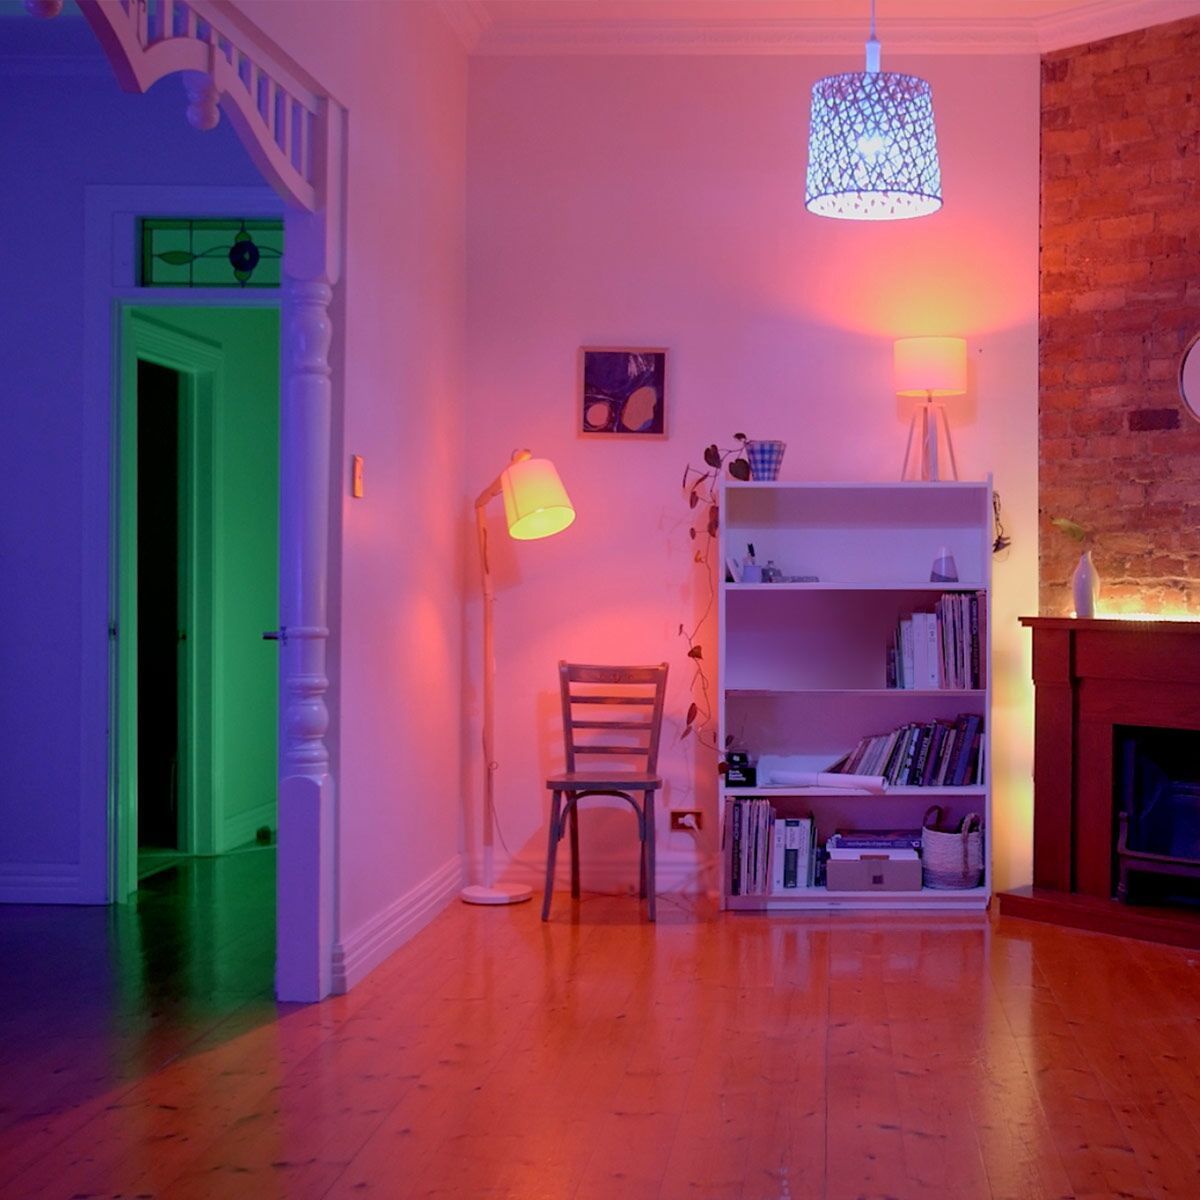 interior of a house with blue, green and orange lights